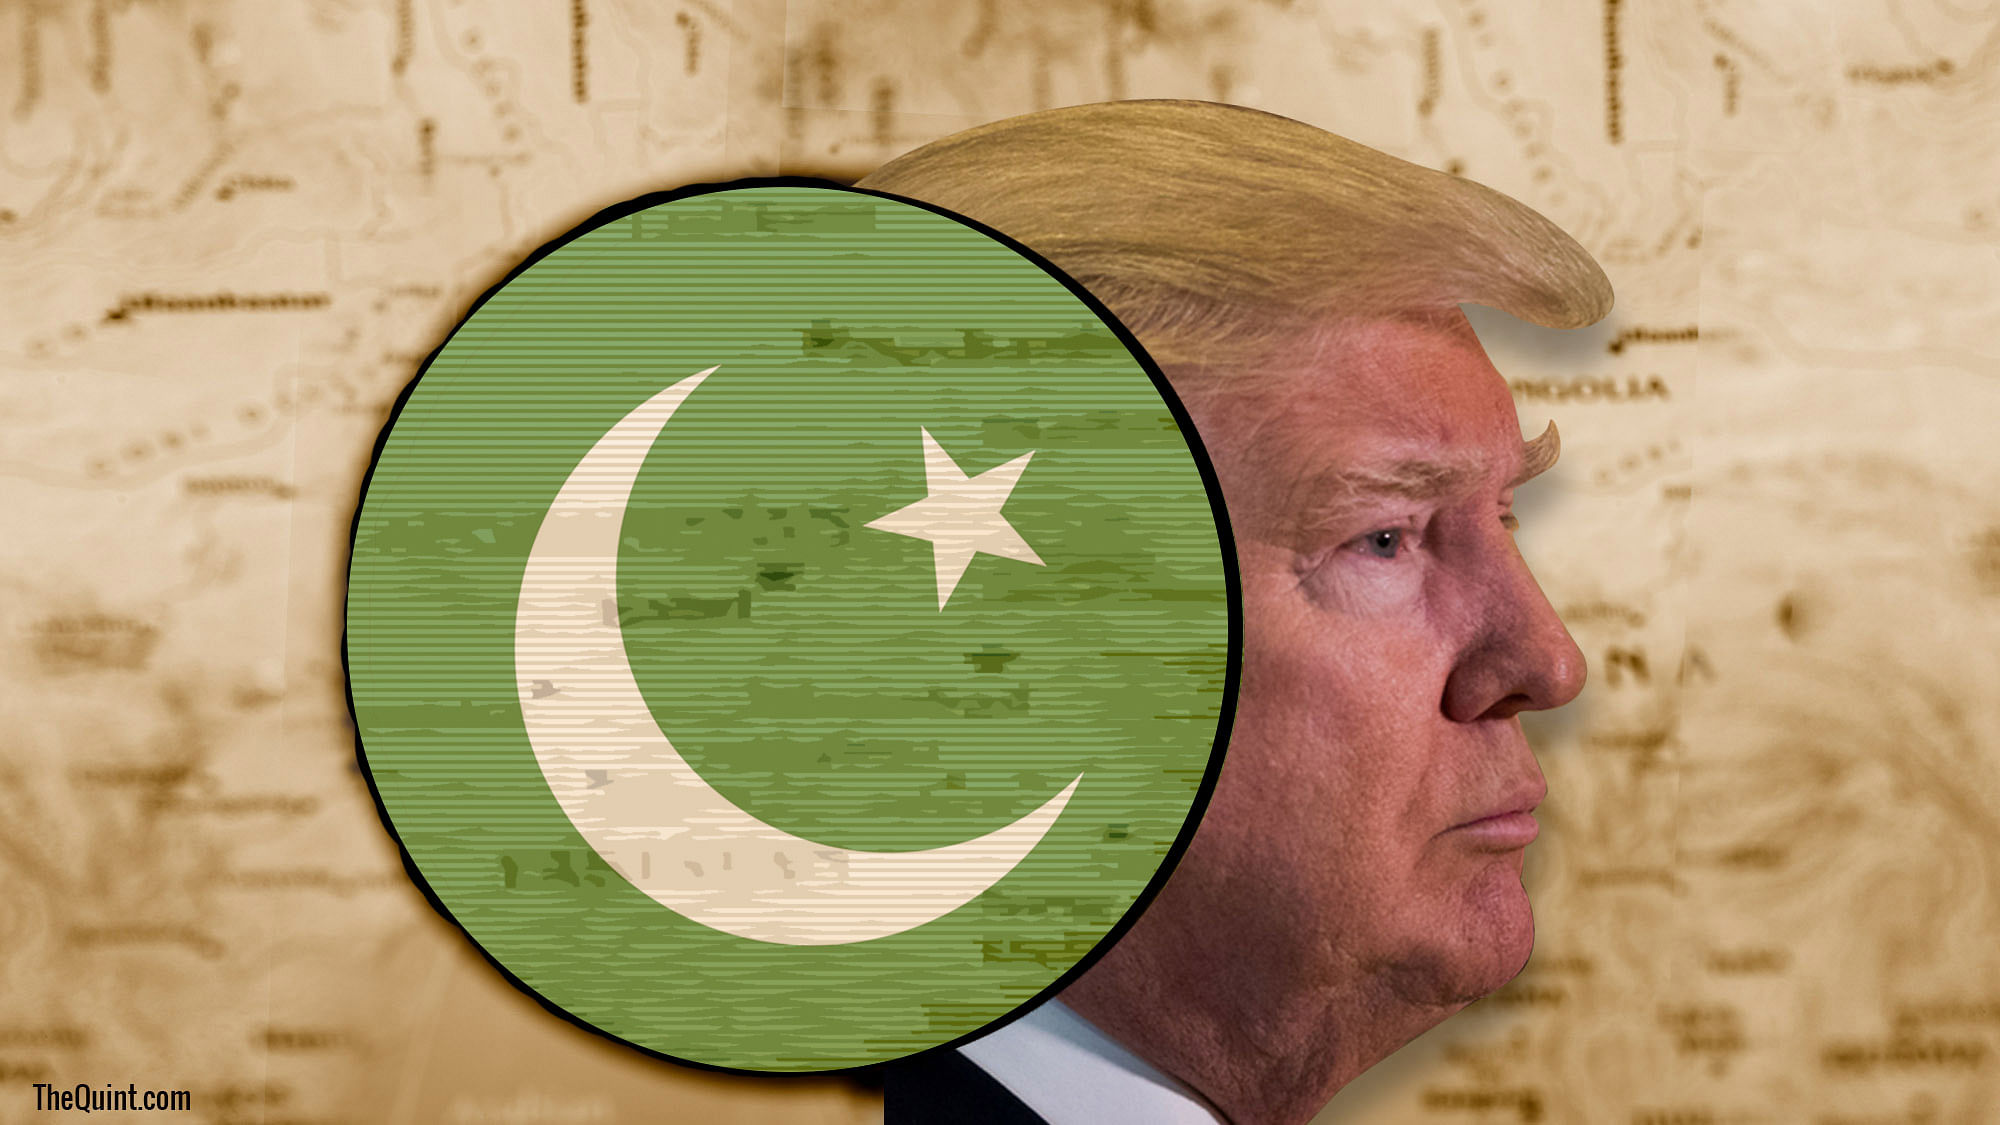 

Following Trump’s U-turn on Pakistan policy, India should rely more on its own capacities and capabilities.